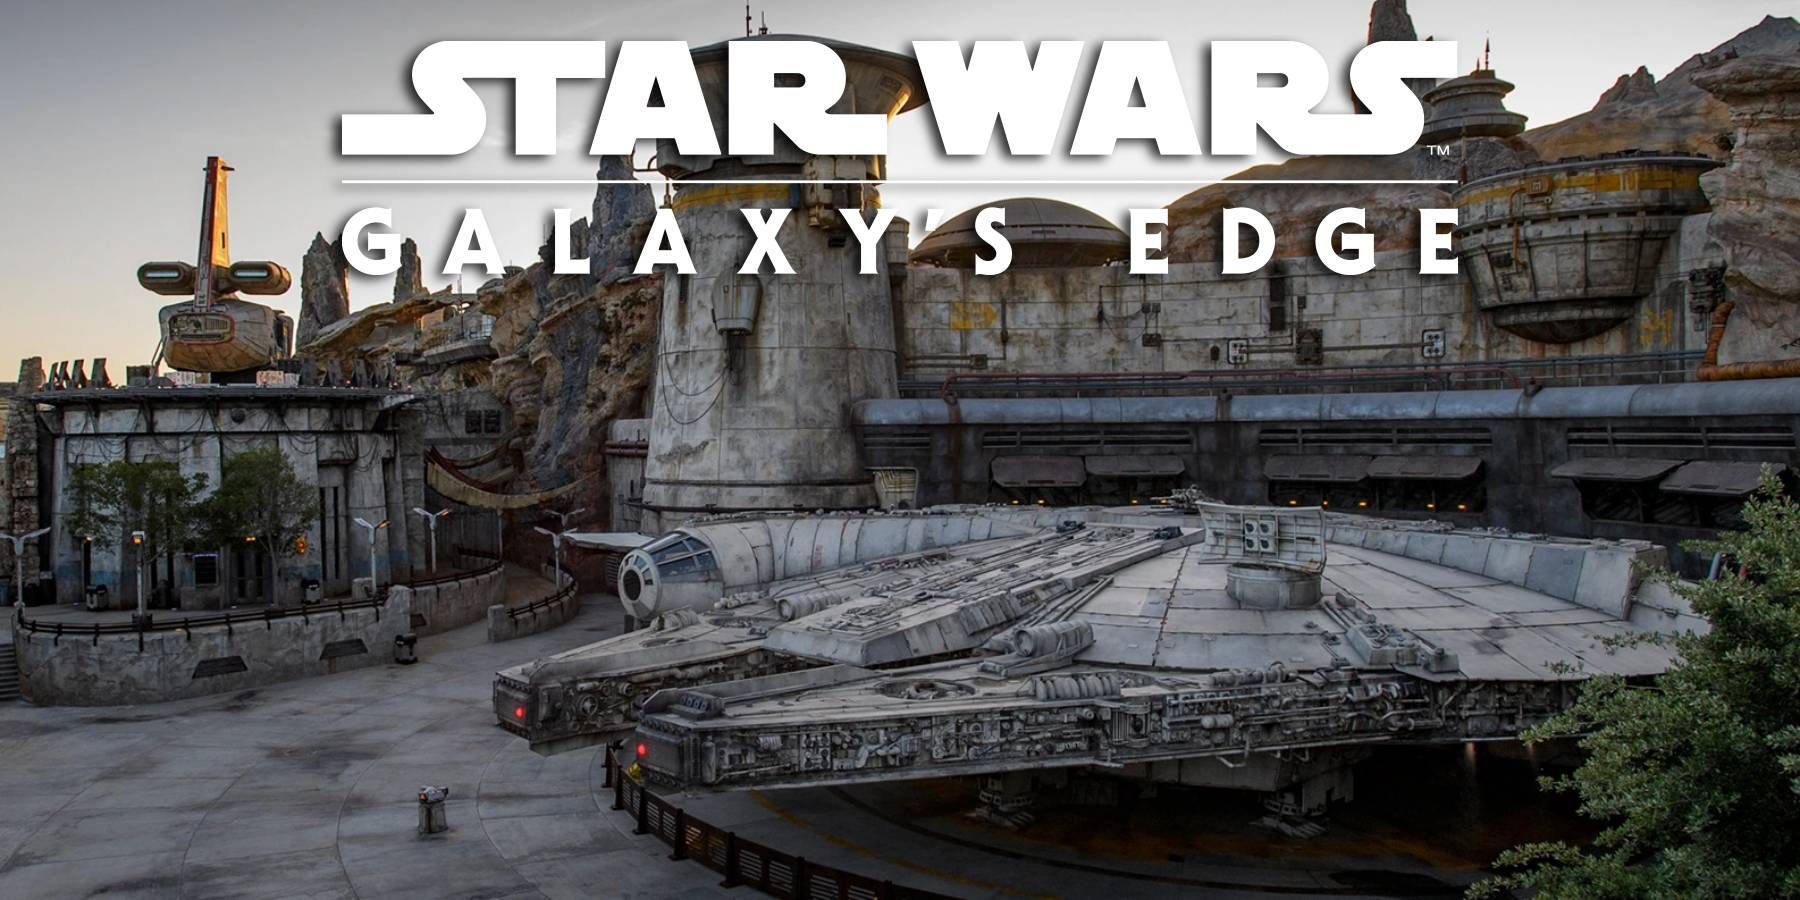 The Millennium Falcon at Star Wars Galaxy's Edge in the Disney Parks